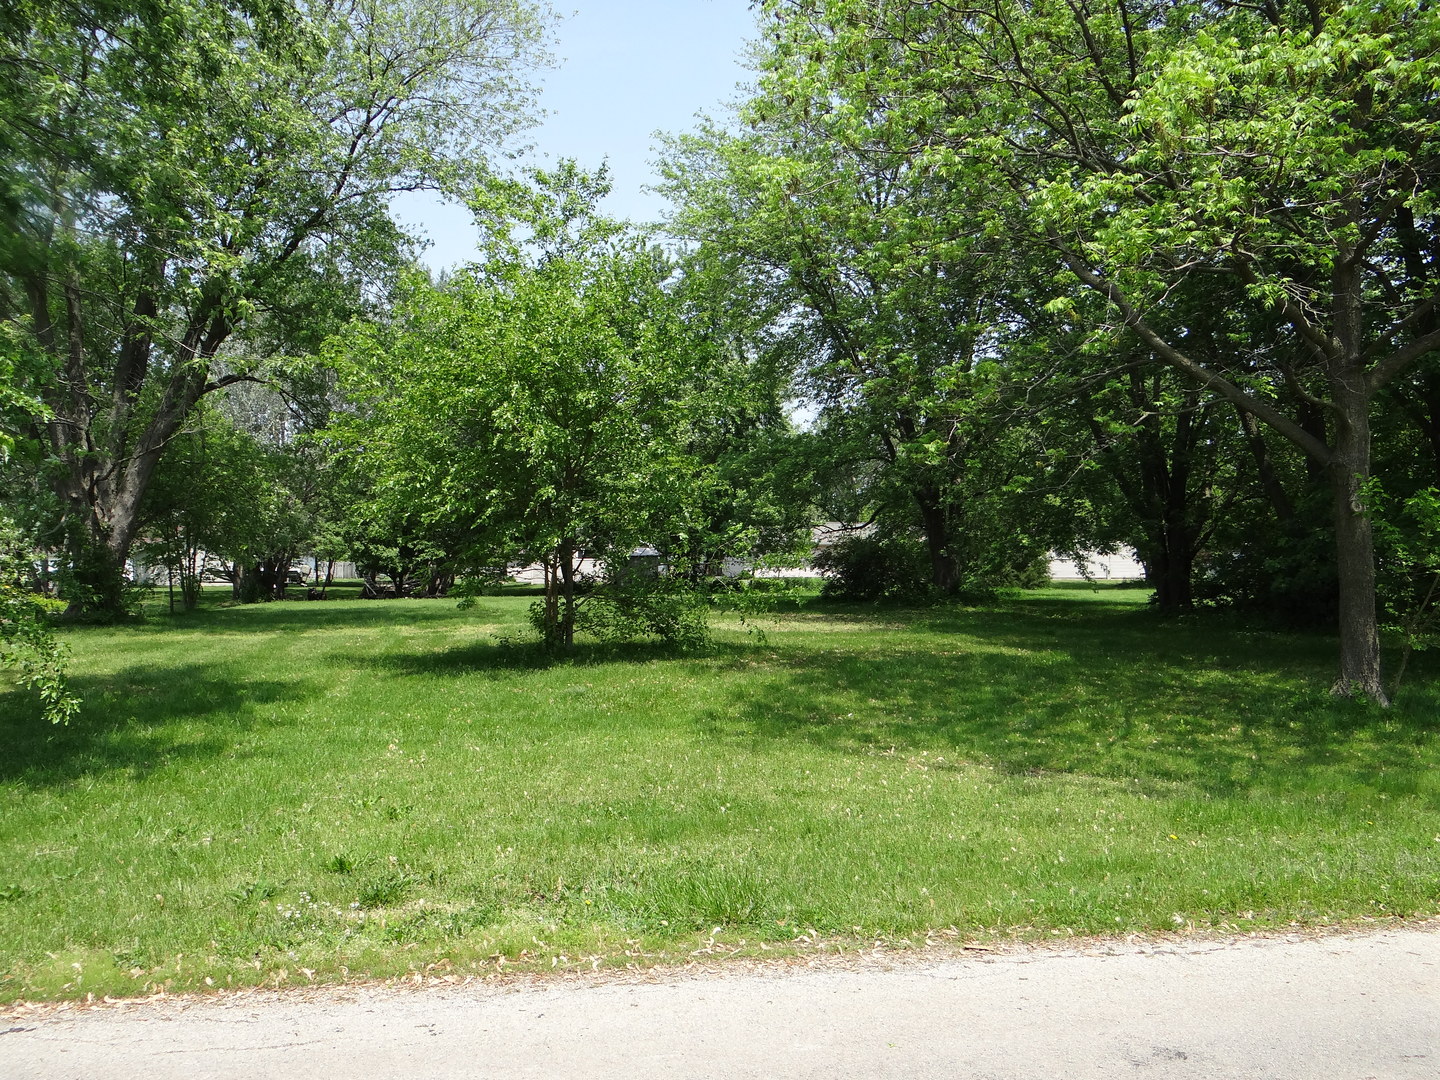 a view of park space